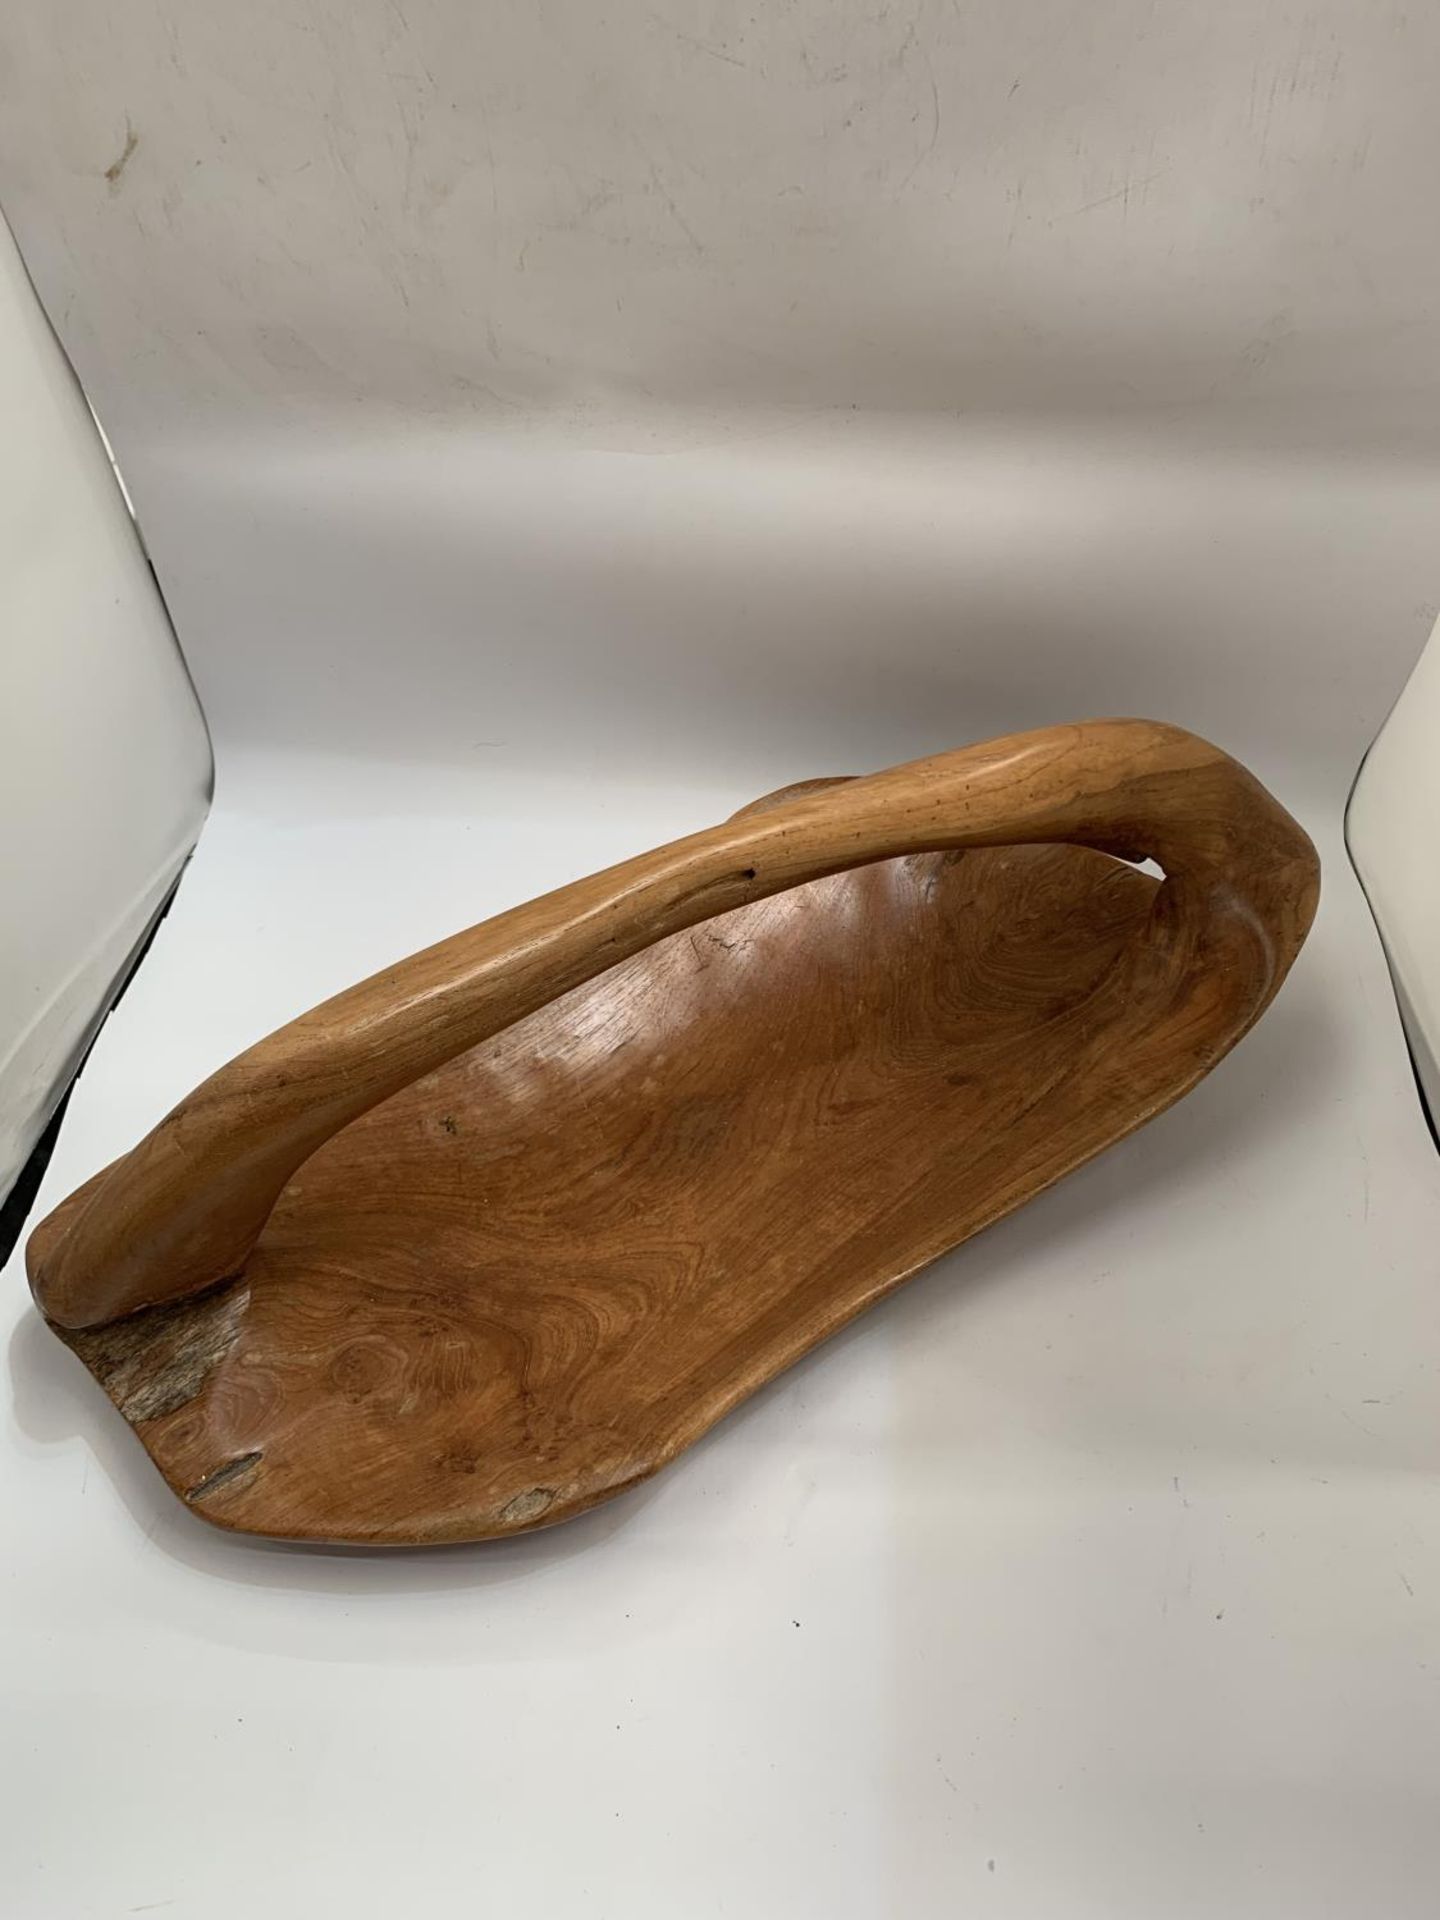 A LARGE VINTAGE HARDWOOD BOWL WITH HANDLE CARVED FROM ONE PIECE OF WOOD, LENGTH 50CM